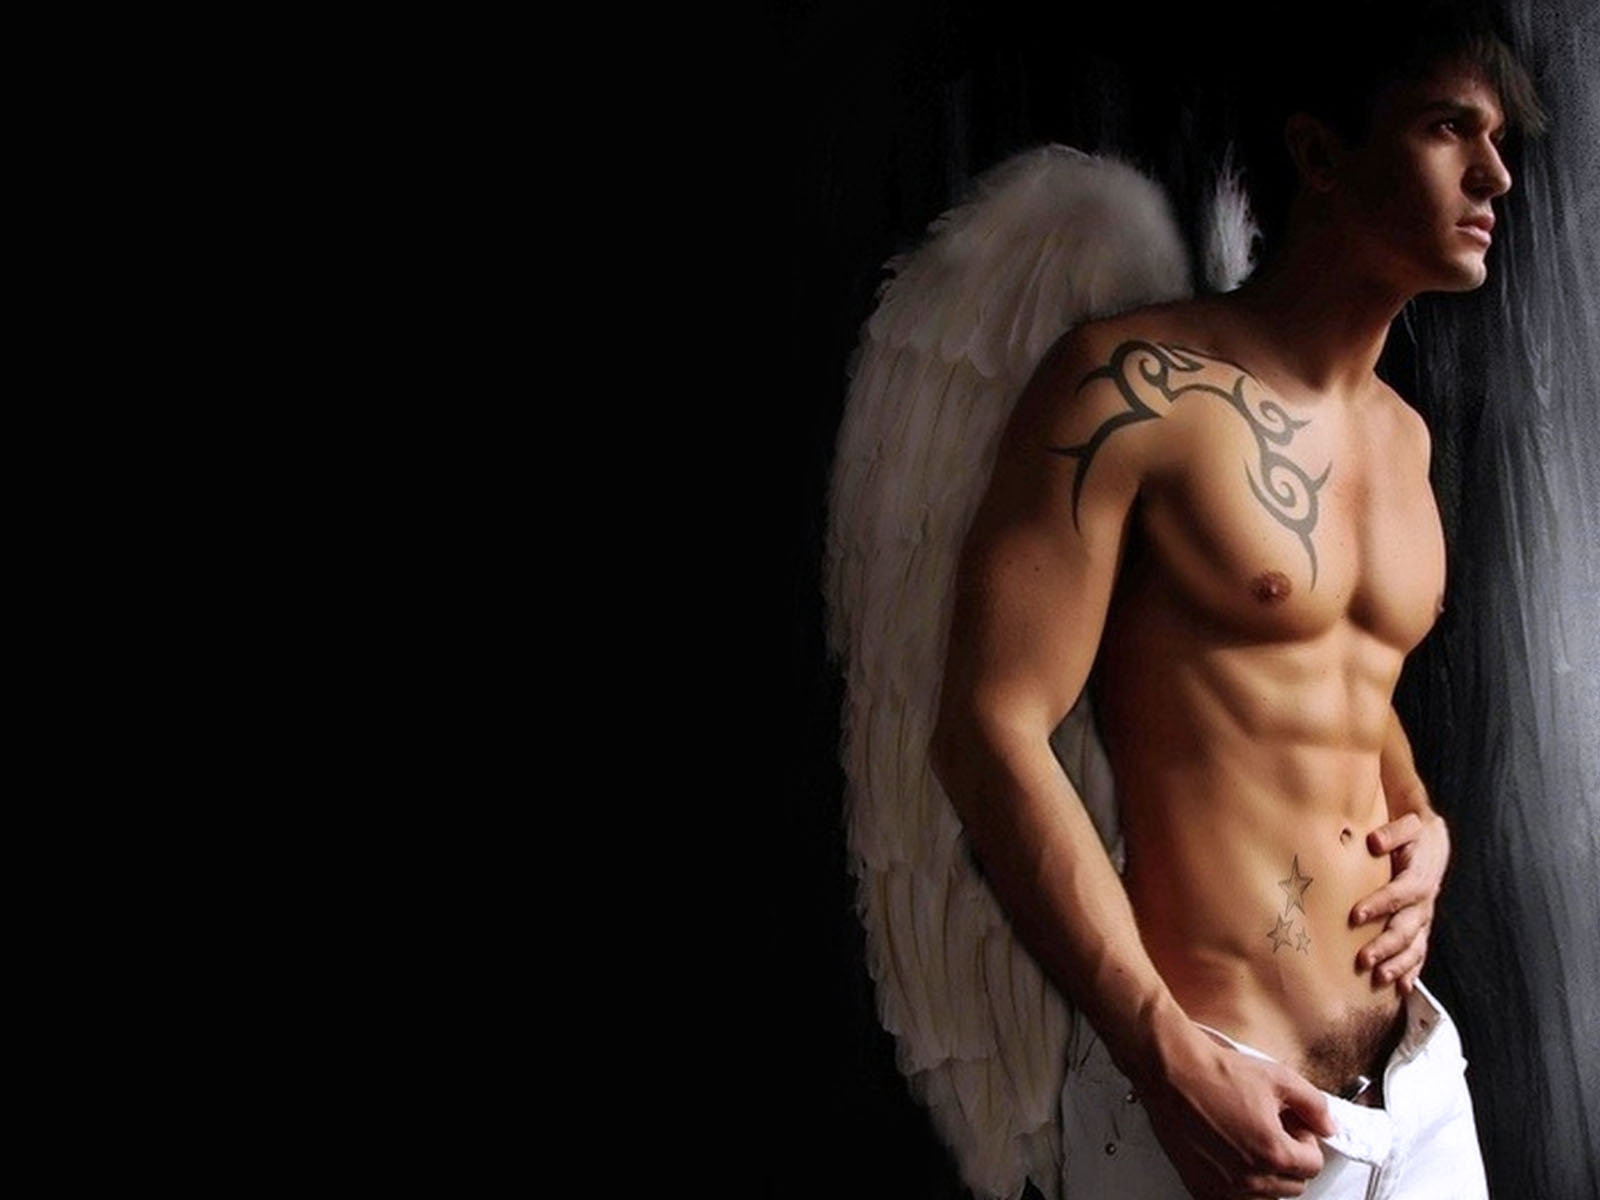 Wallpapers by OFCP: Angel (683)